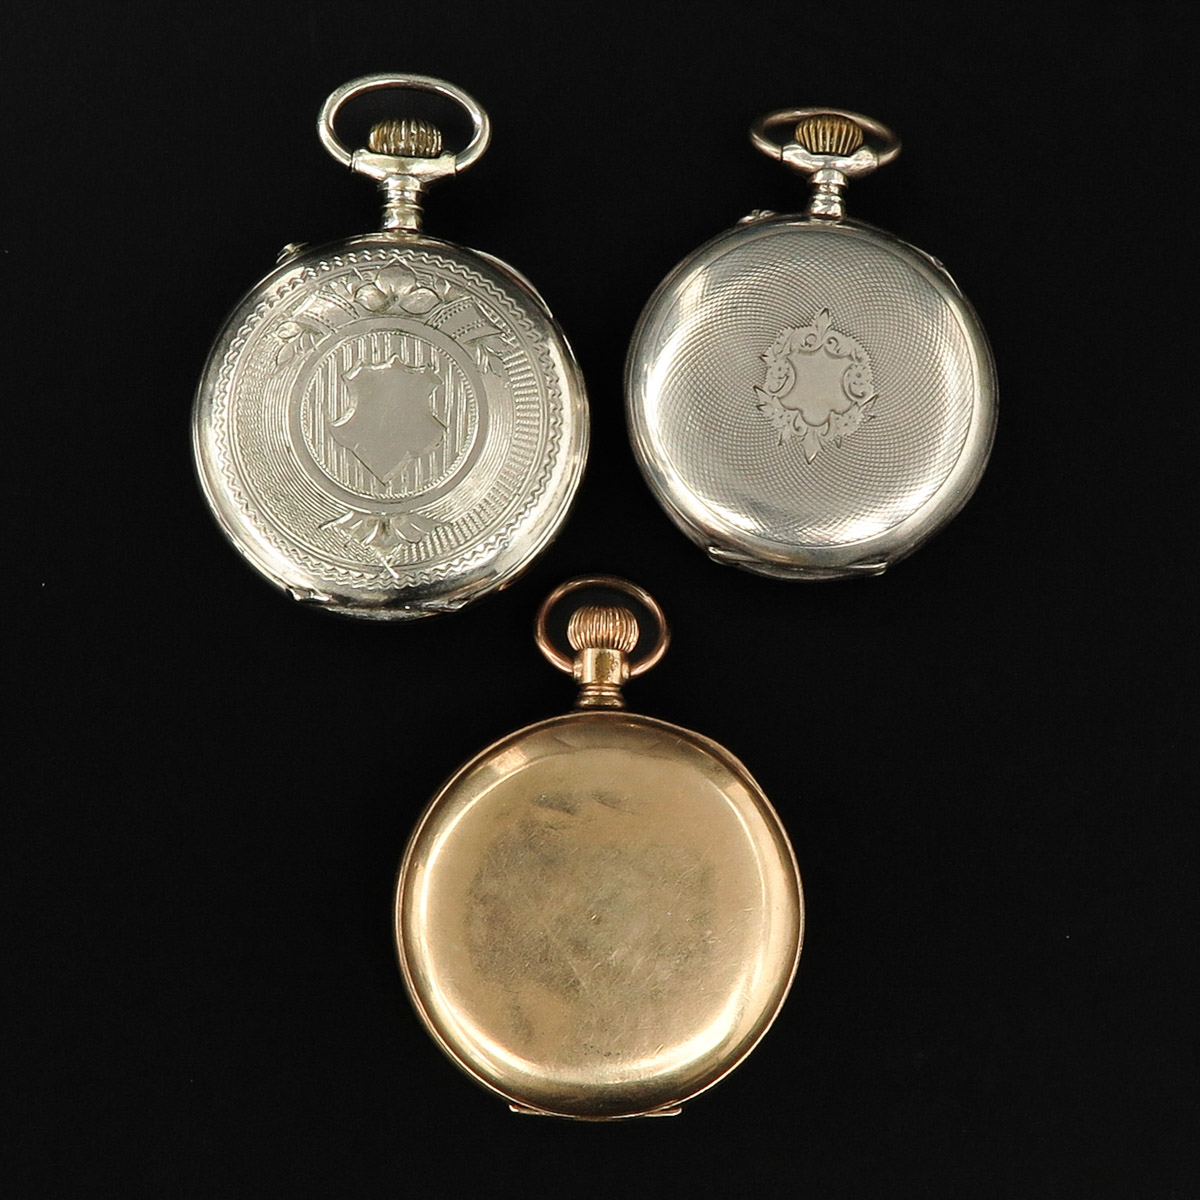 A Collection of 9 Pocket Watches - Image 4 of 10